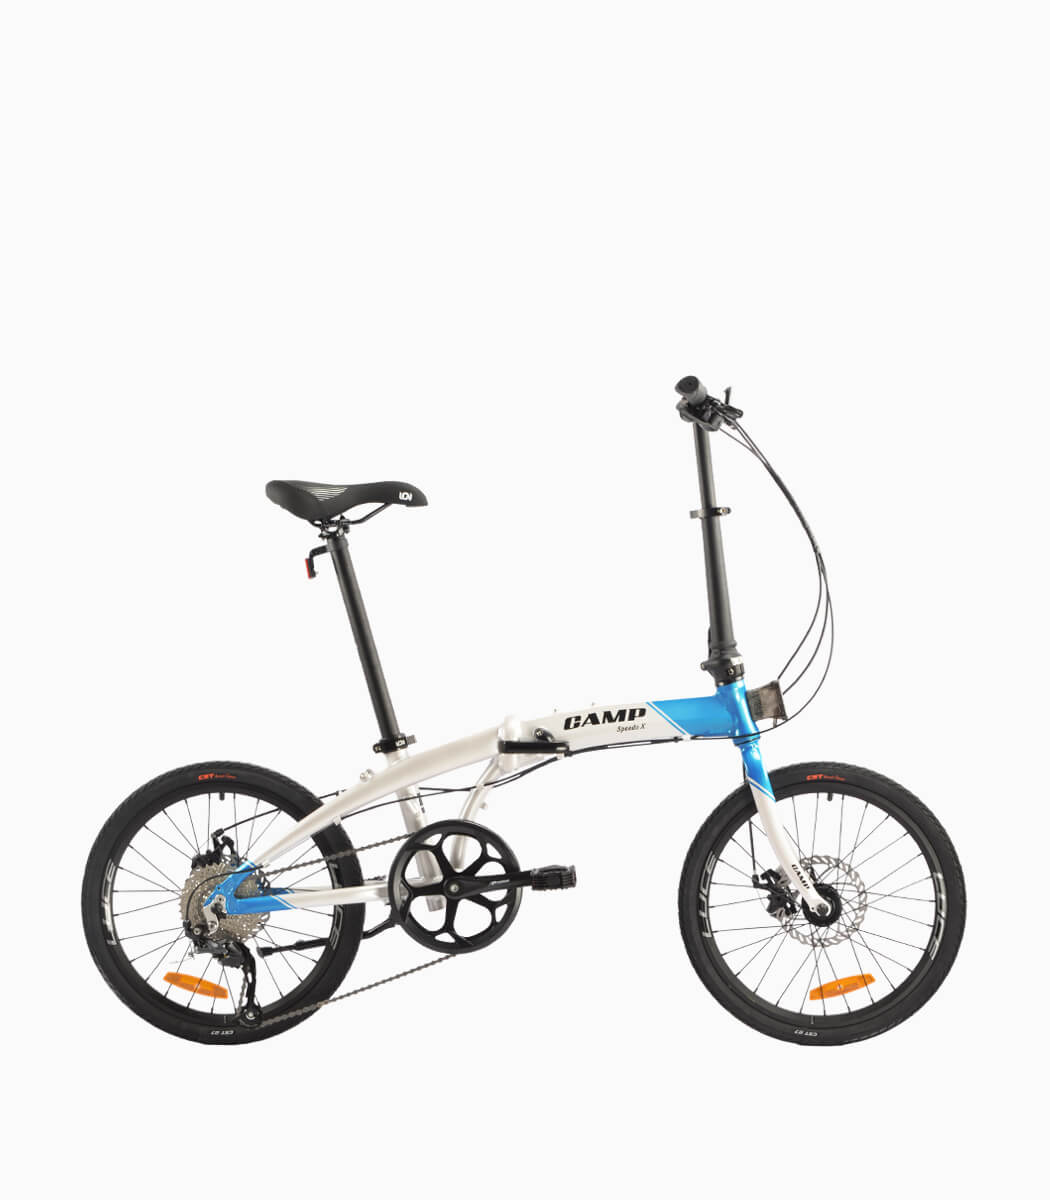 CAMP SPEEDO X (WHITE-BLUE) foldable bicycle right V1